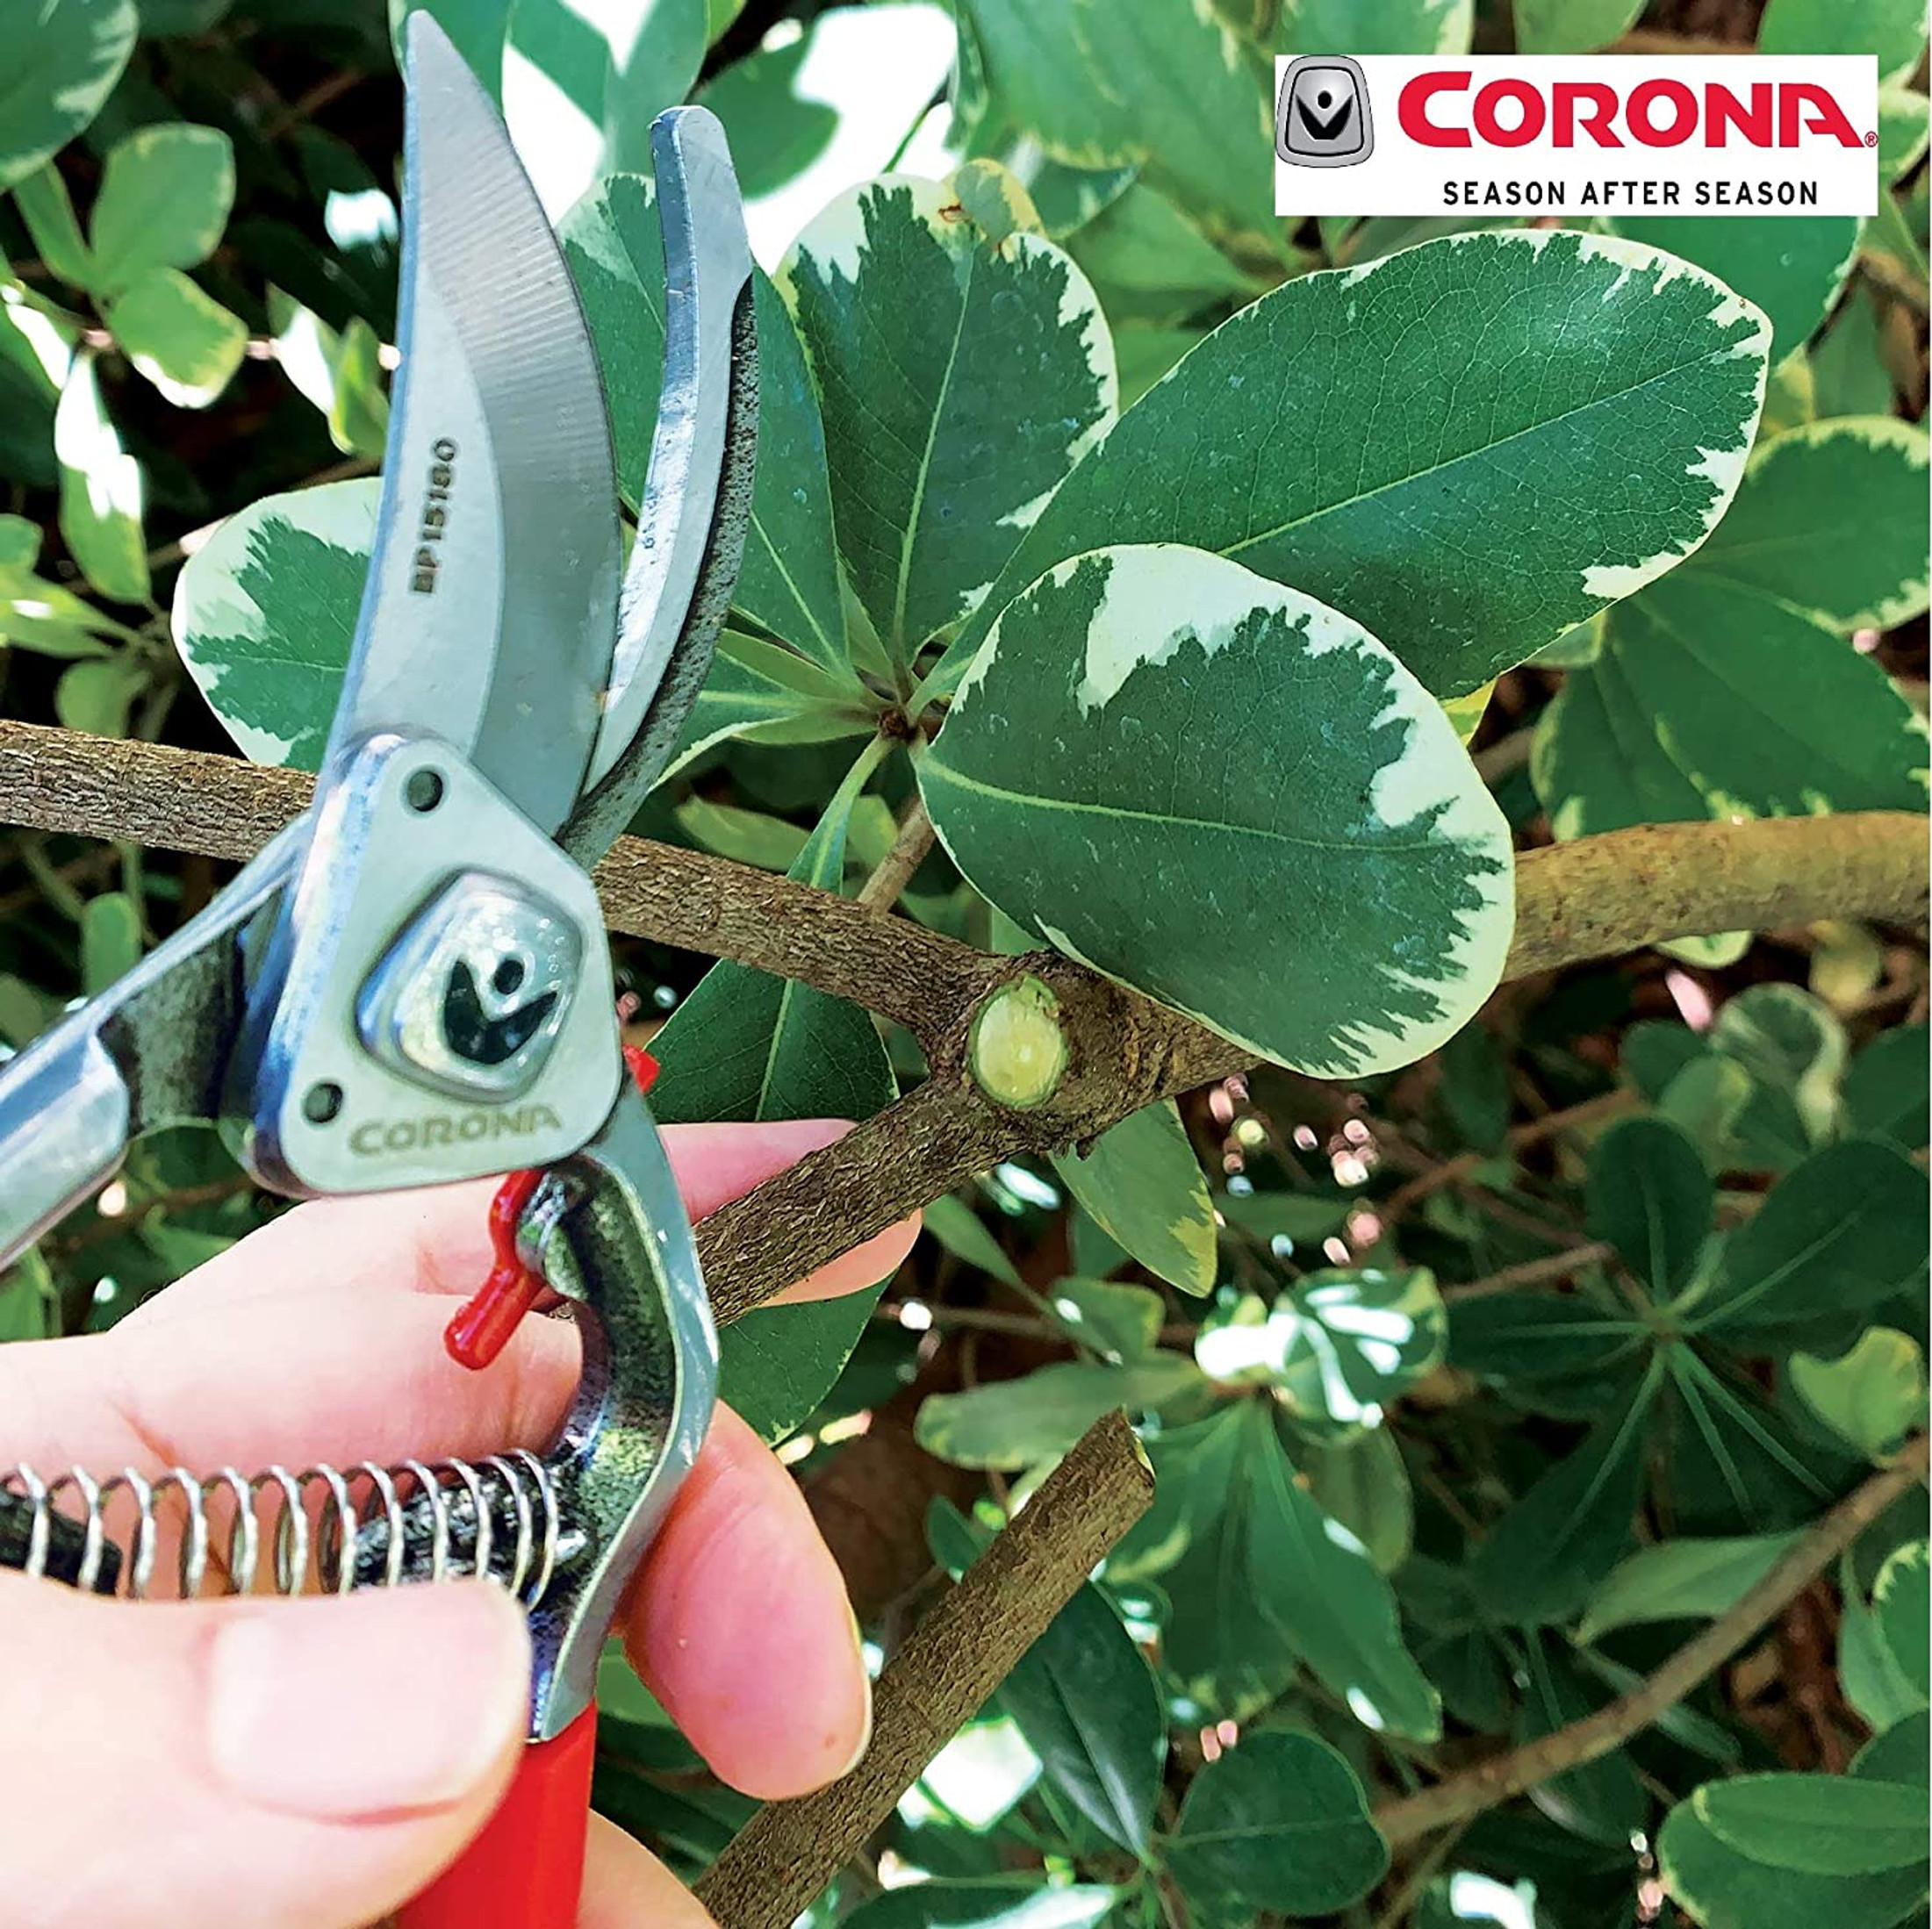 Corona BP3670 1 in. Forged Landscape Irrigation Bypass Pruner